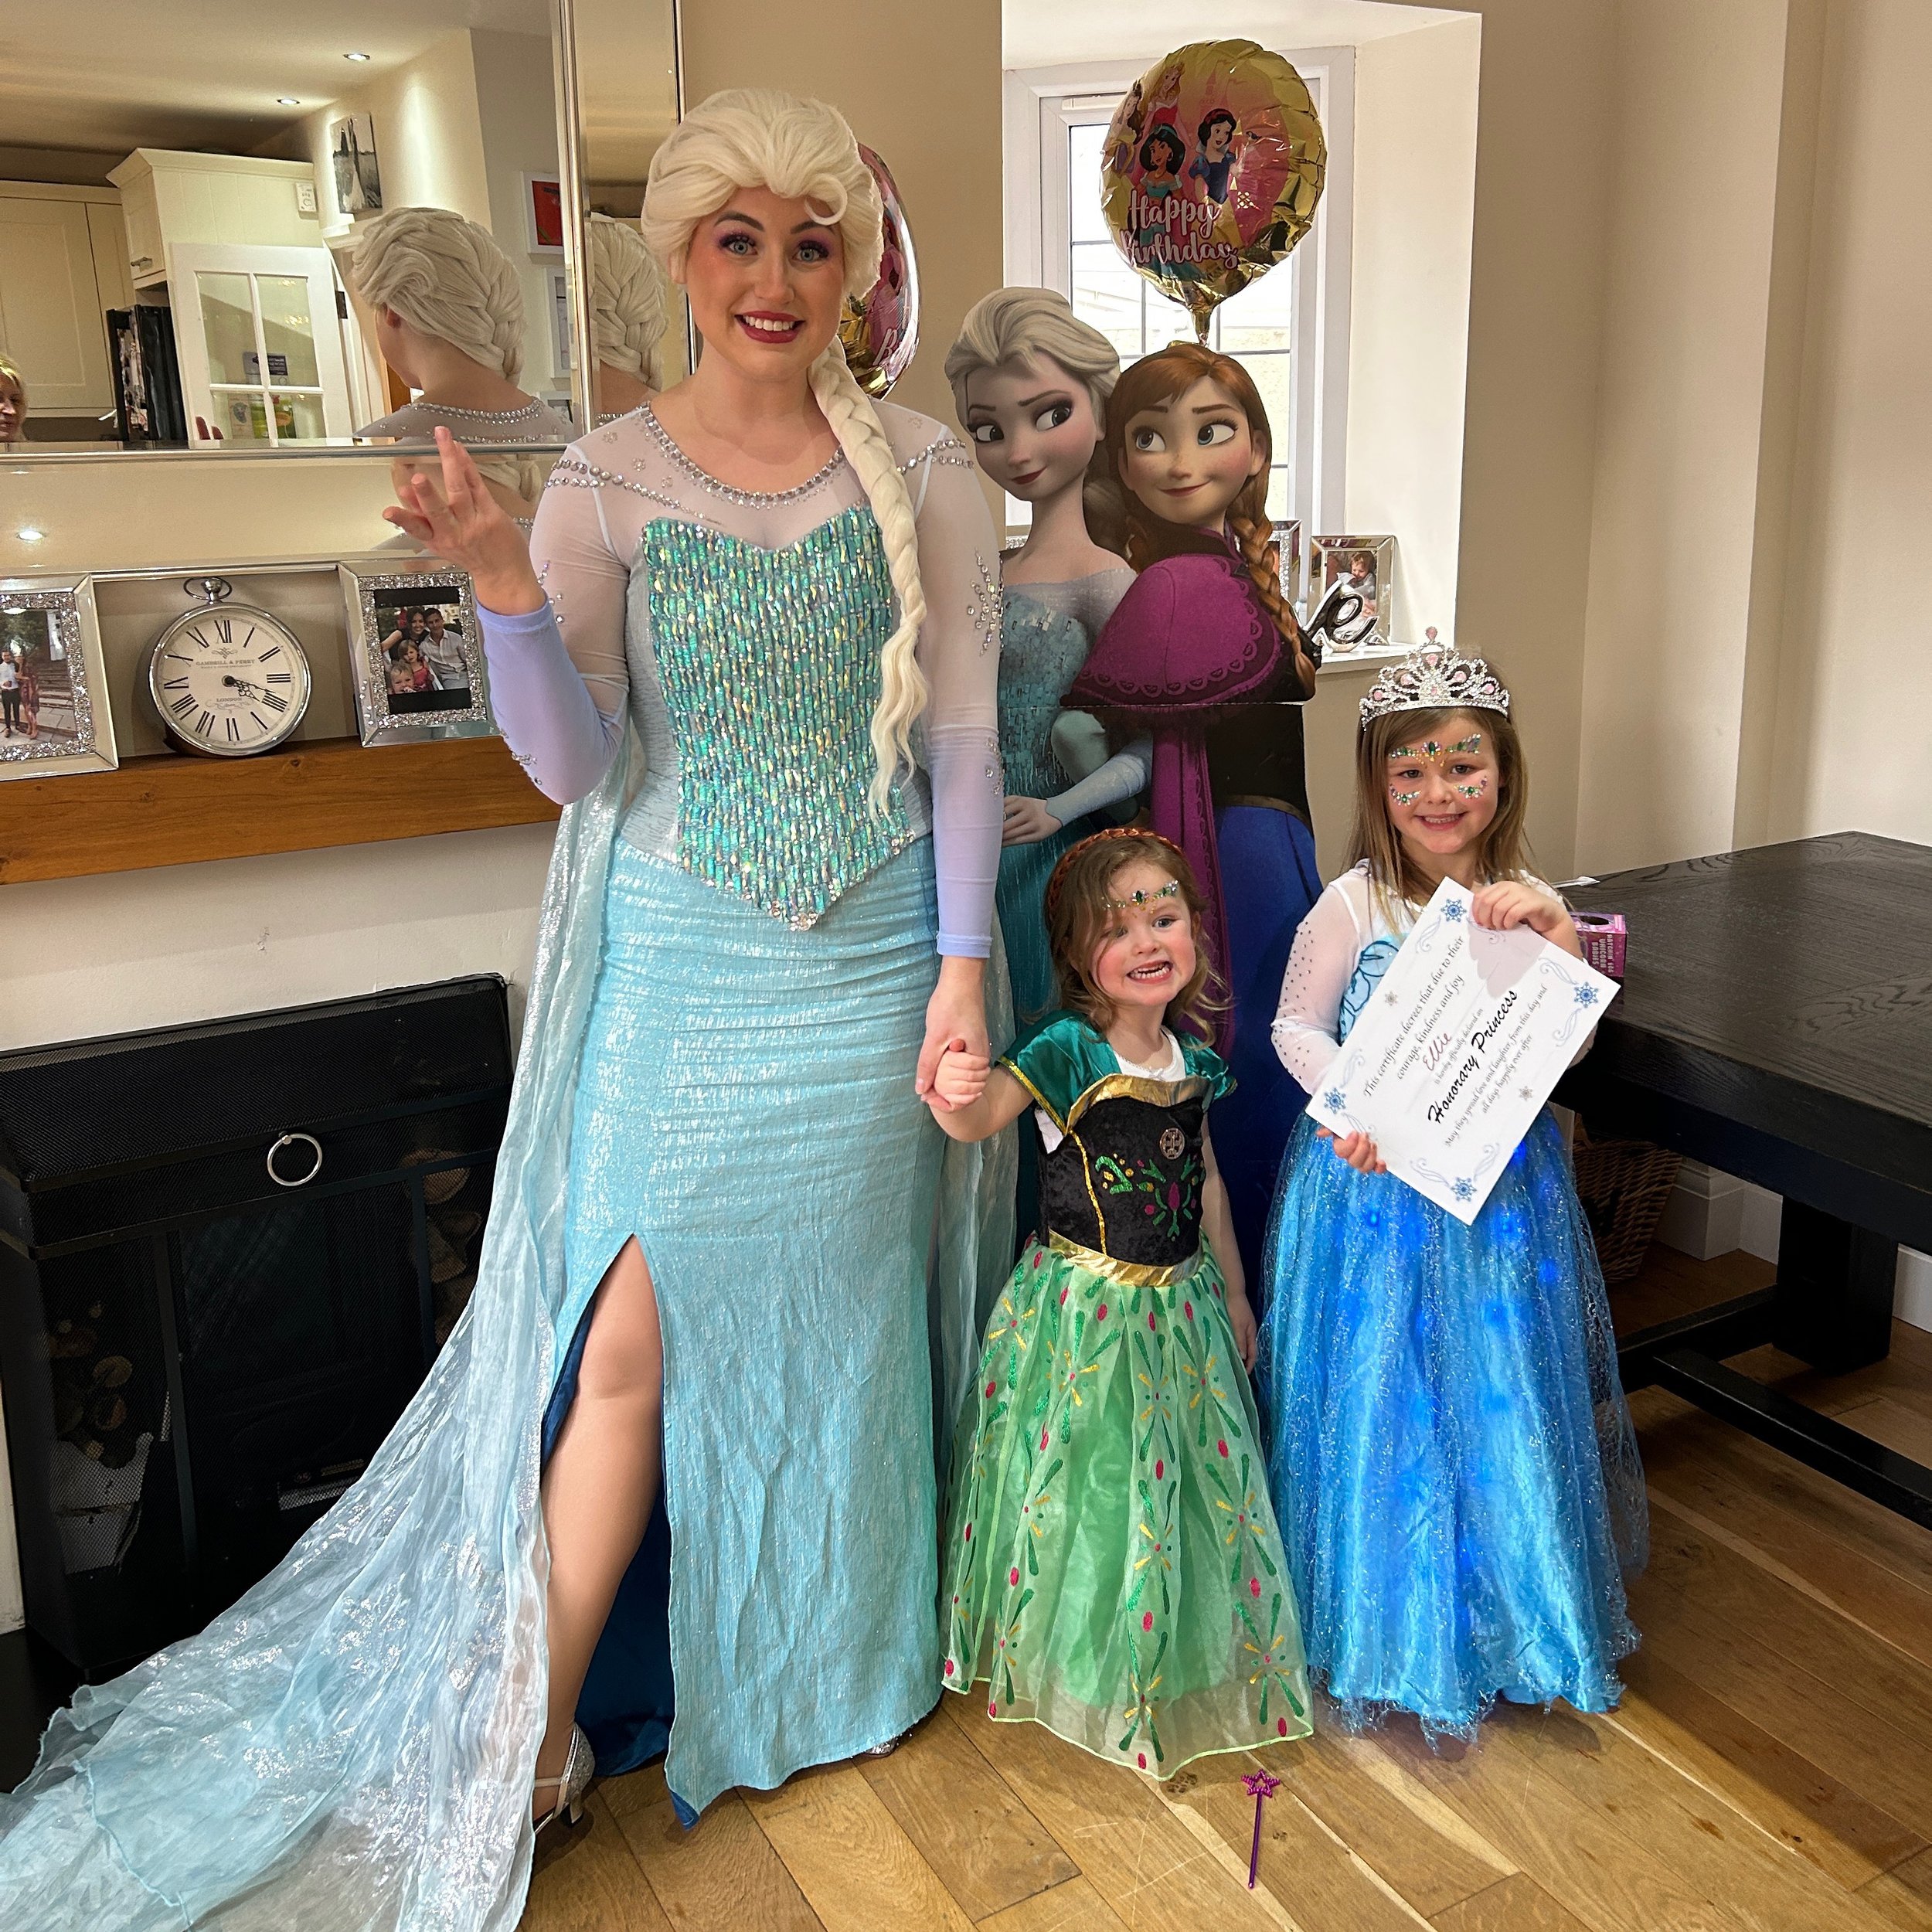 Our Ice Queen spreading magic at this wonderful birthday party! Just look at these sisters dressed up as the famous duo!❄️❄️ invite our princesses to your birthday parties or events!

#WhereTheMagicBegins
💻www.magicalprincesspartiesessex.com
📲 0737